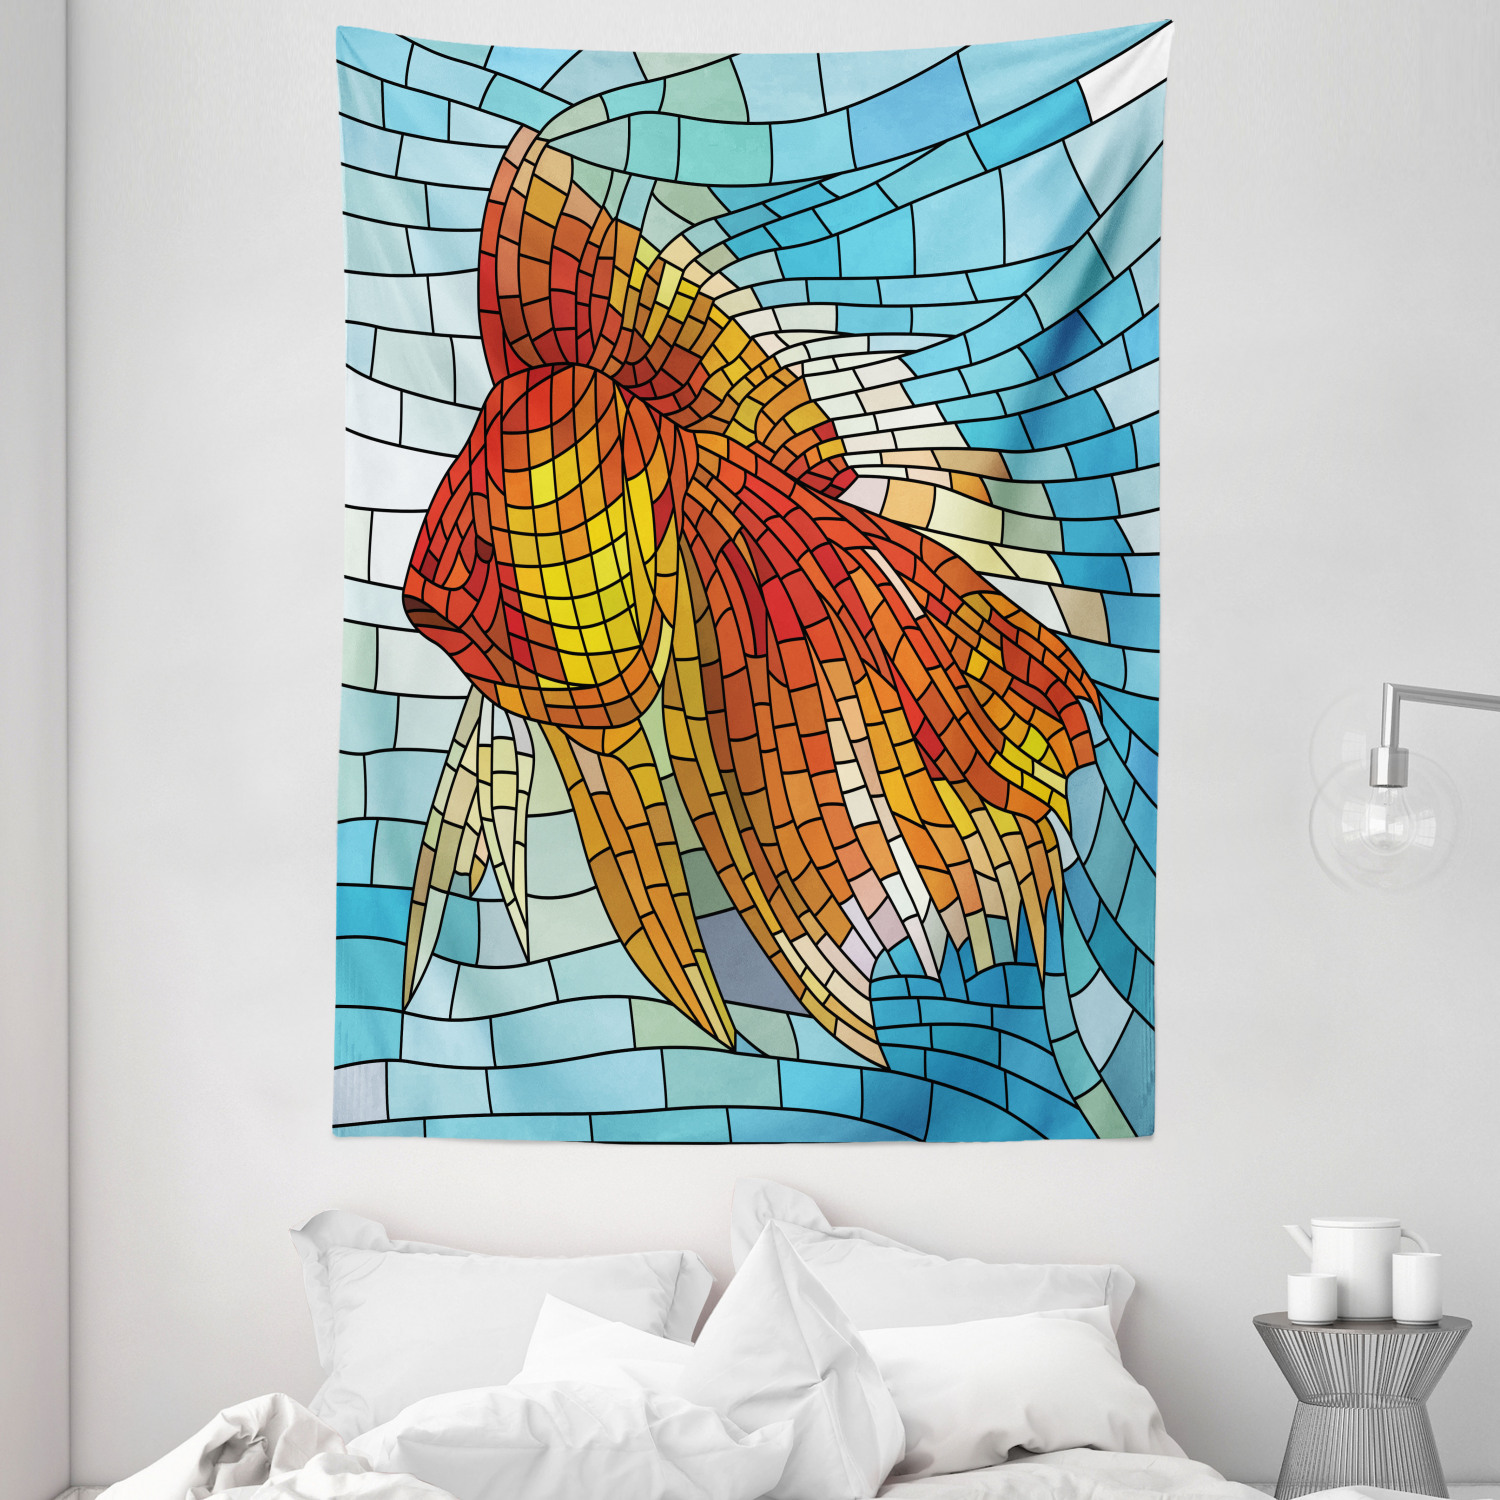 Fish Tapestry Stained Glass Geometric Print Wall Hanging Decor